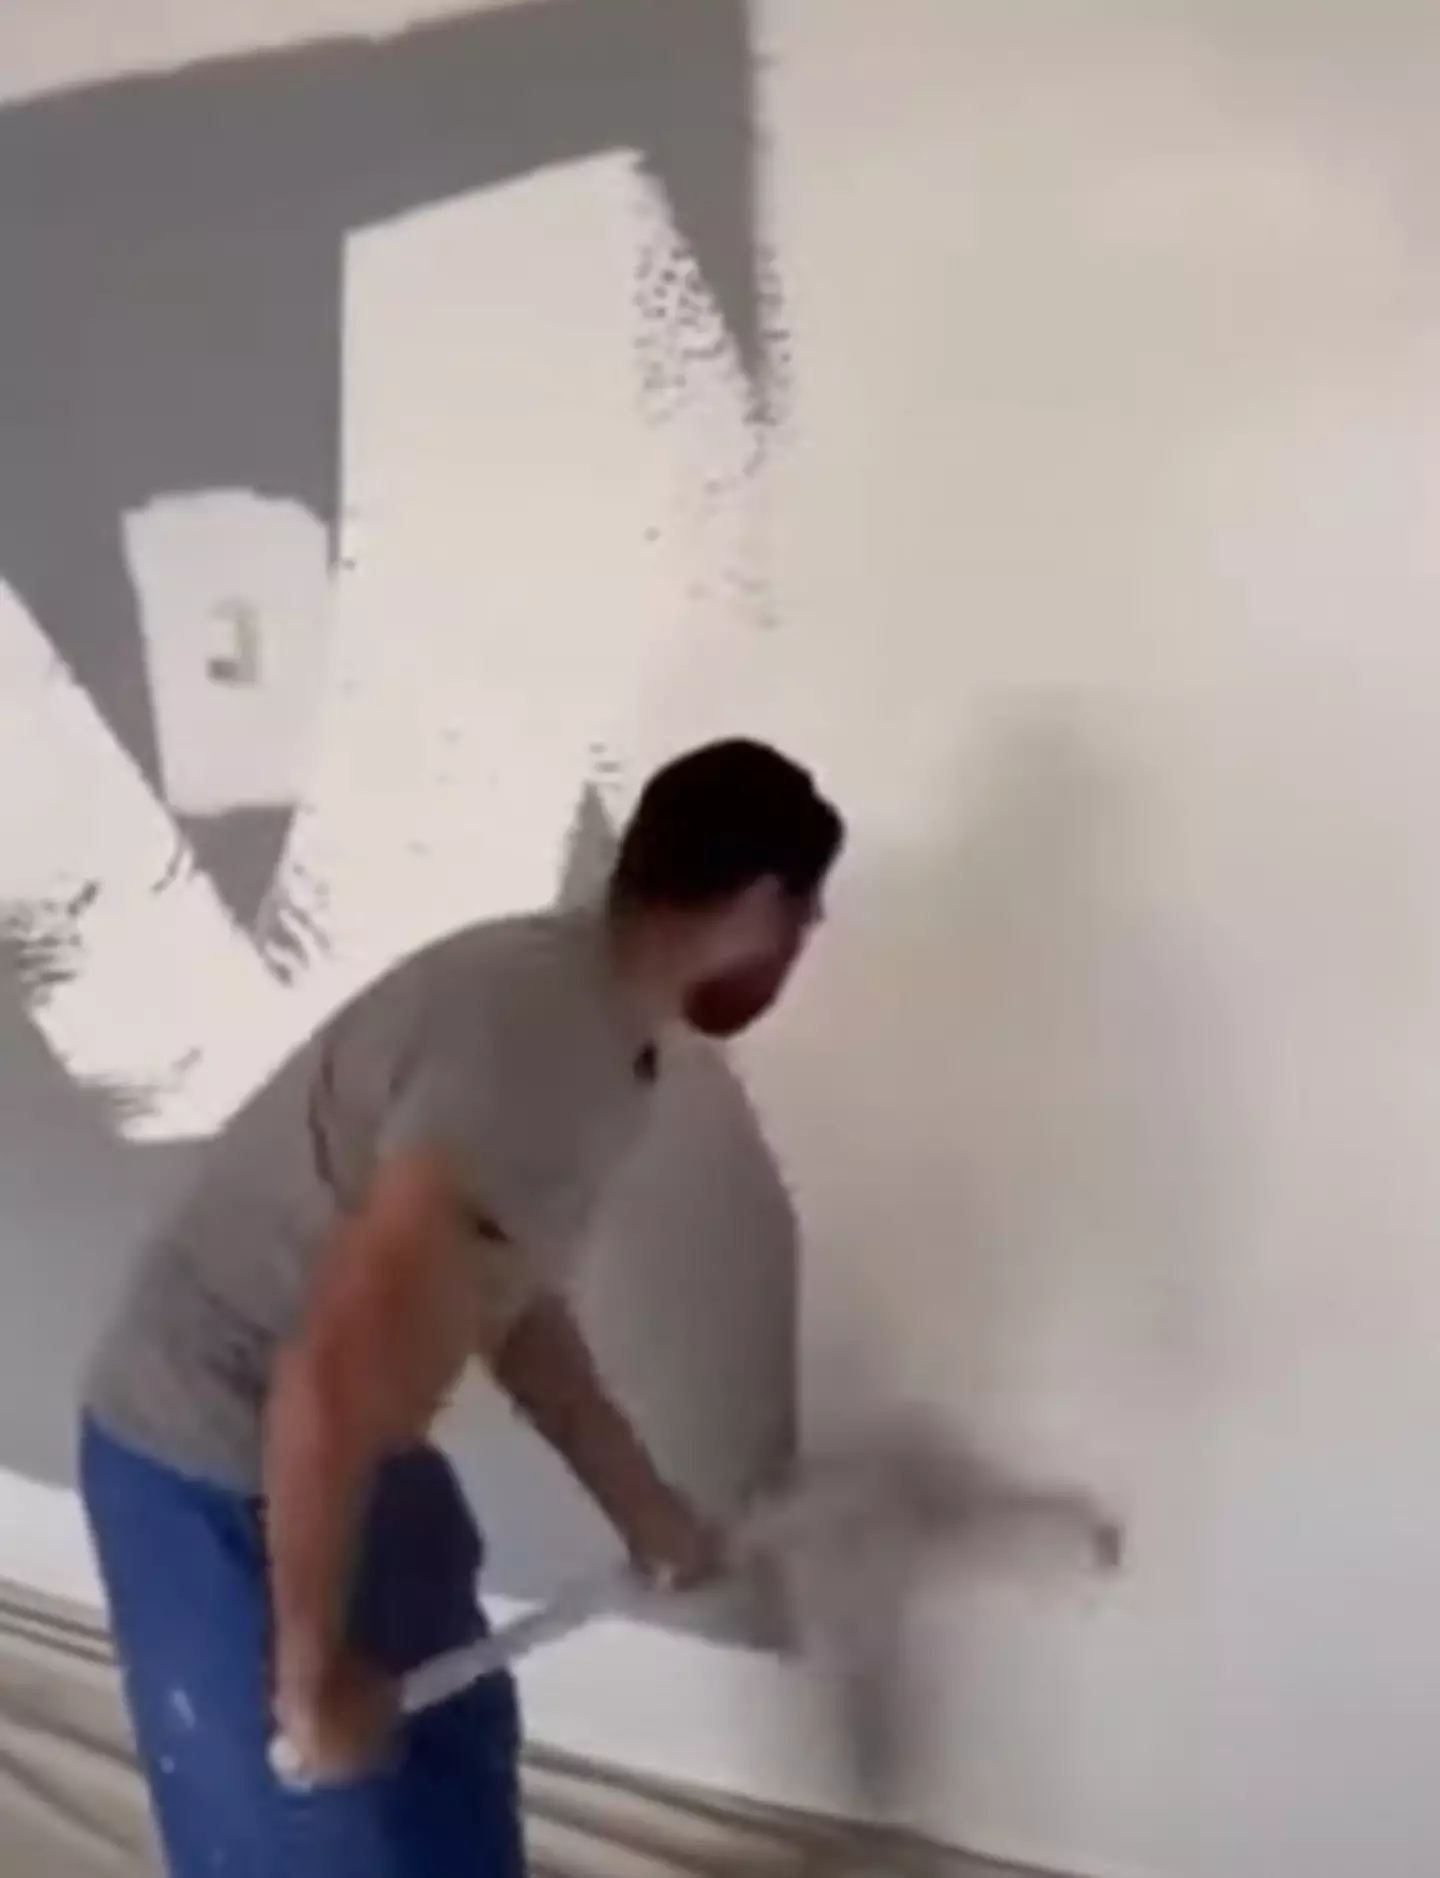 The man painted a wall in under a minute.